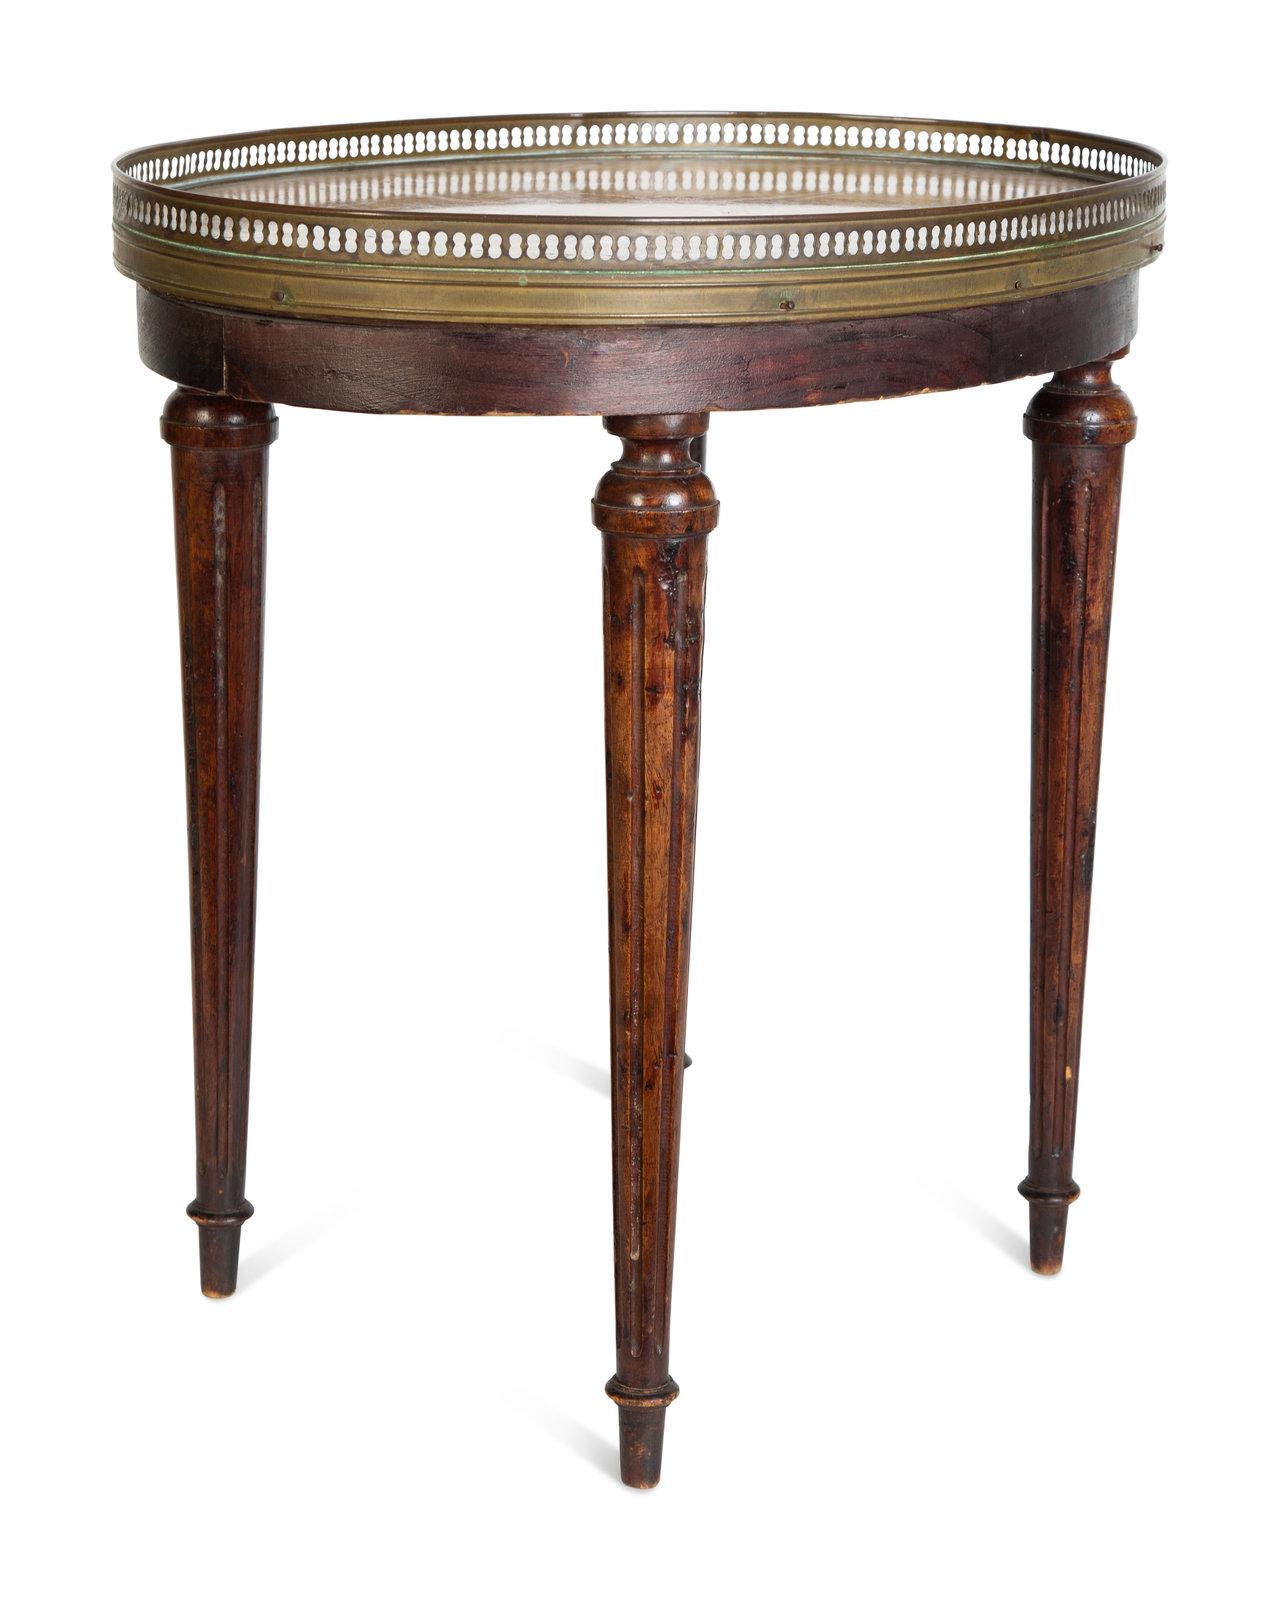 Round Marble Top Side Table with a Gallery and Reeded Legs, Late 19th Century 1